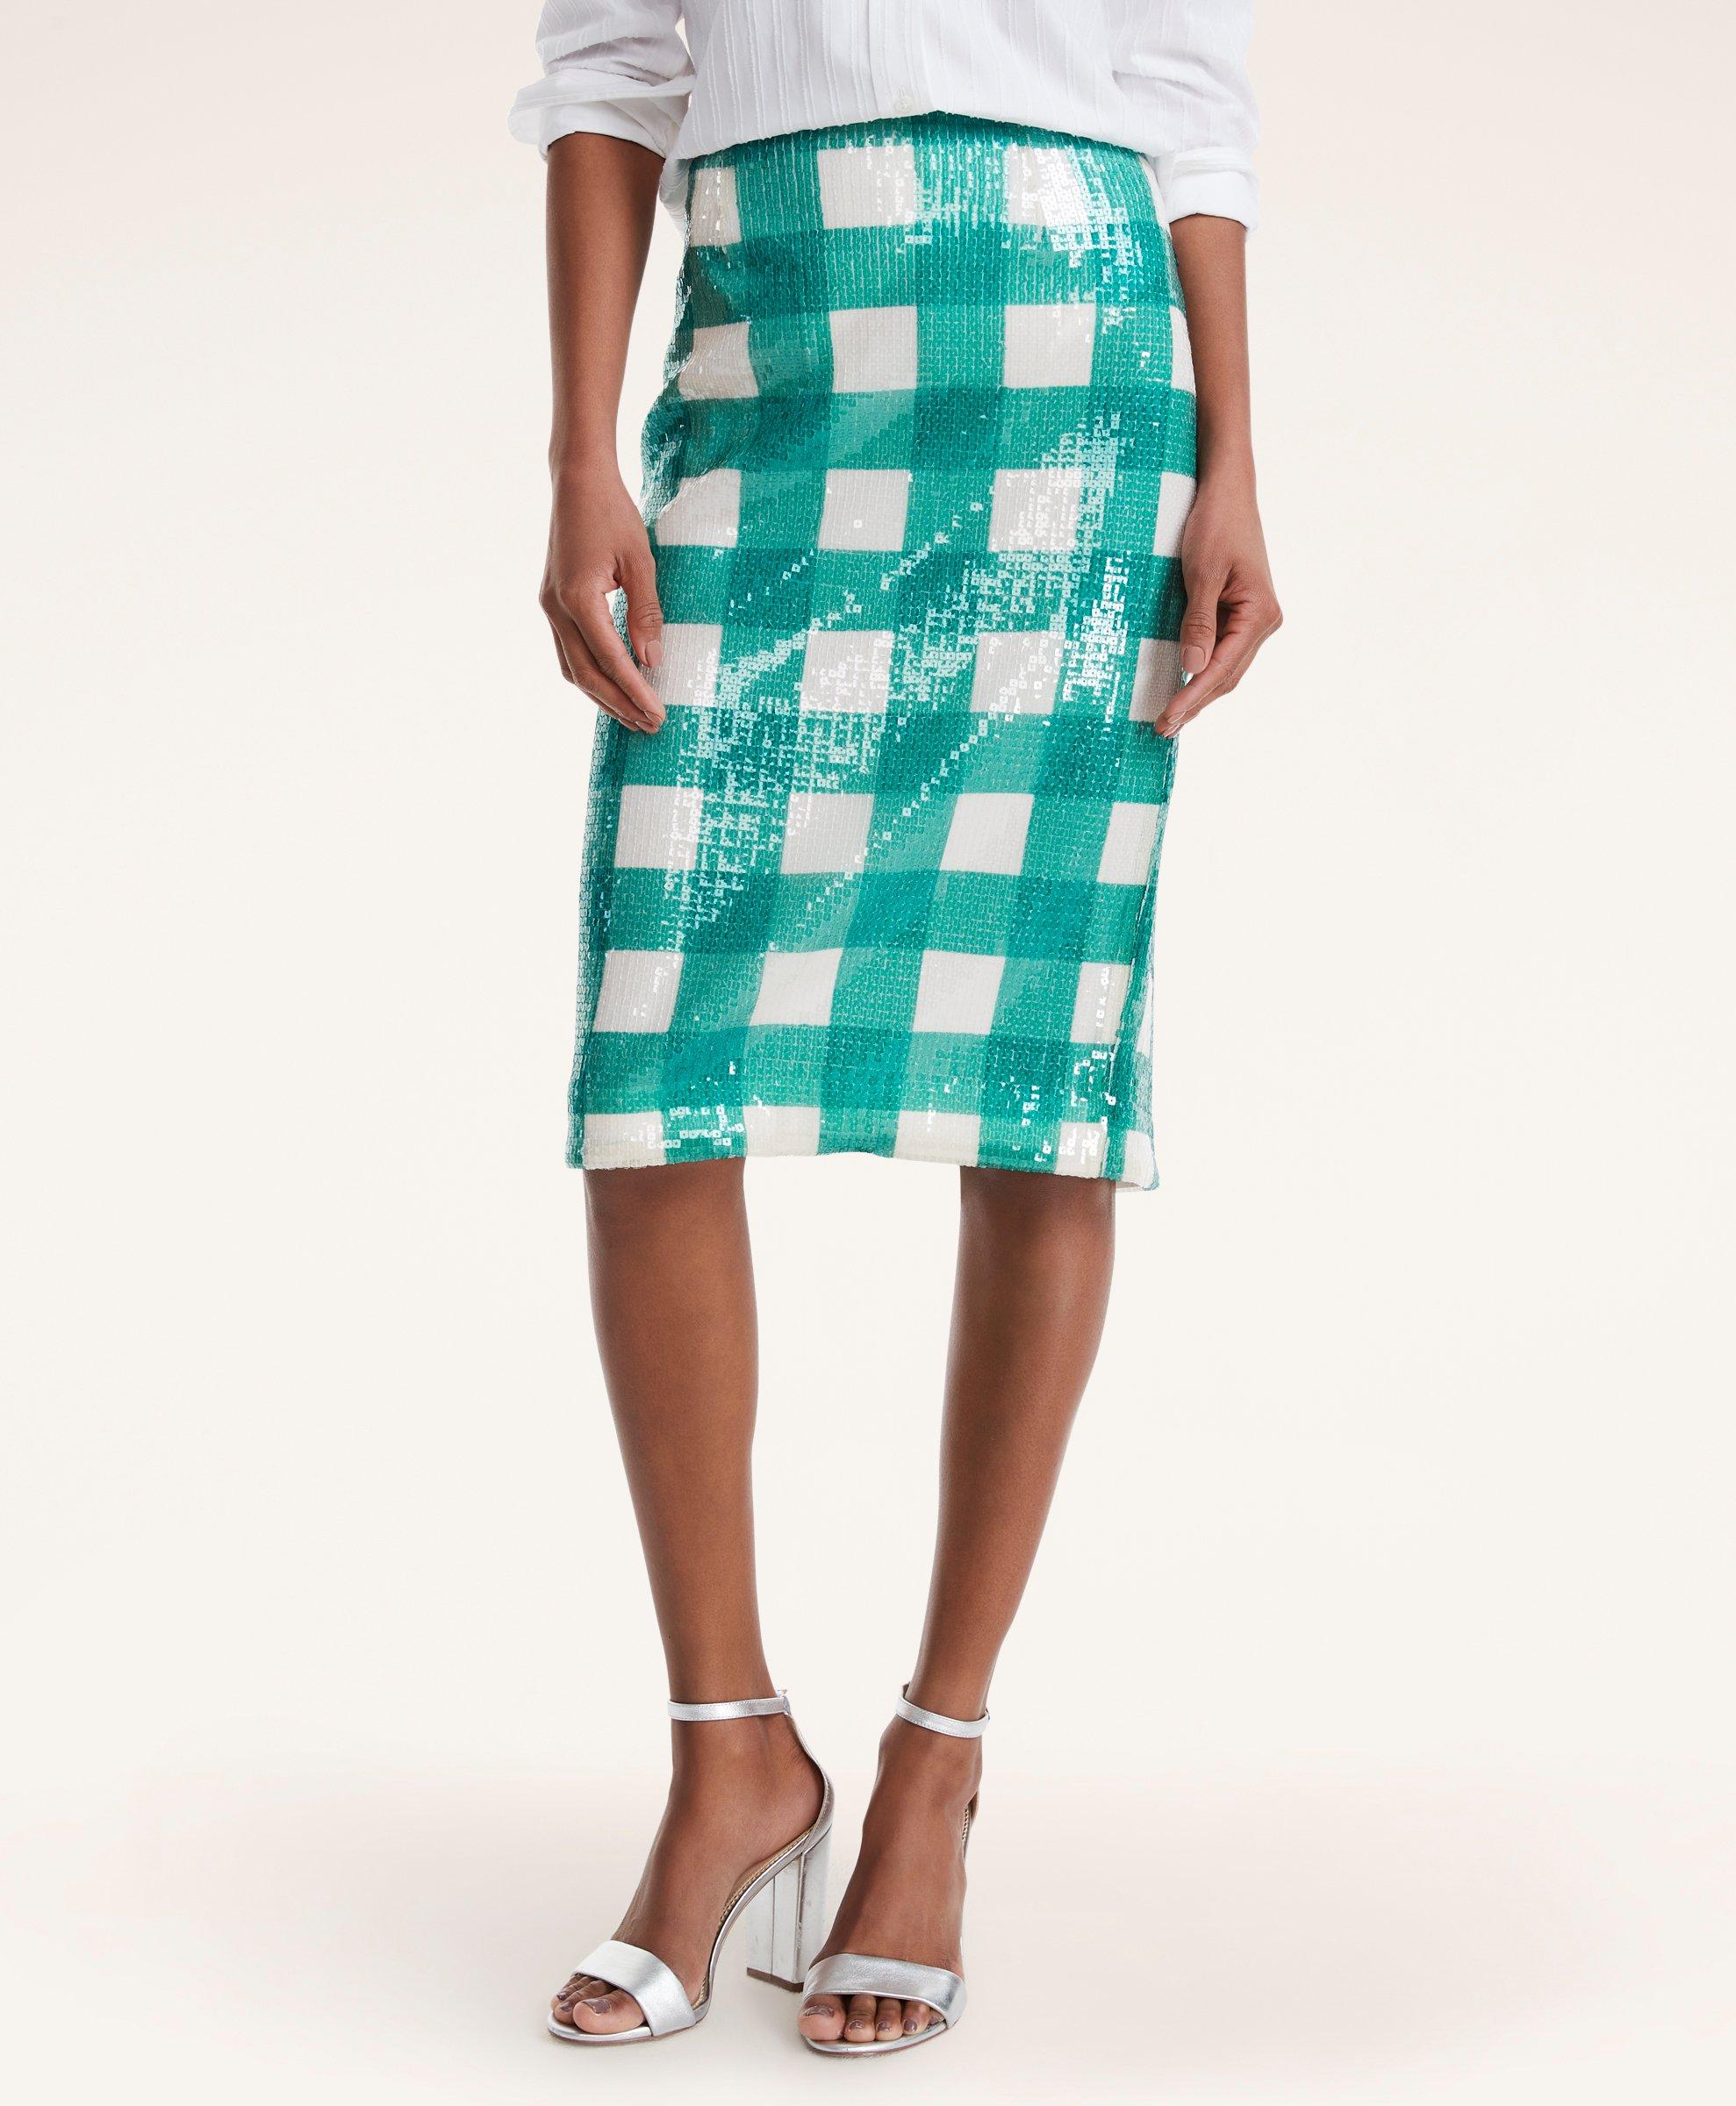 Gingham Sequin Pencil Skirt, image 1